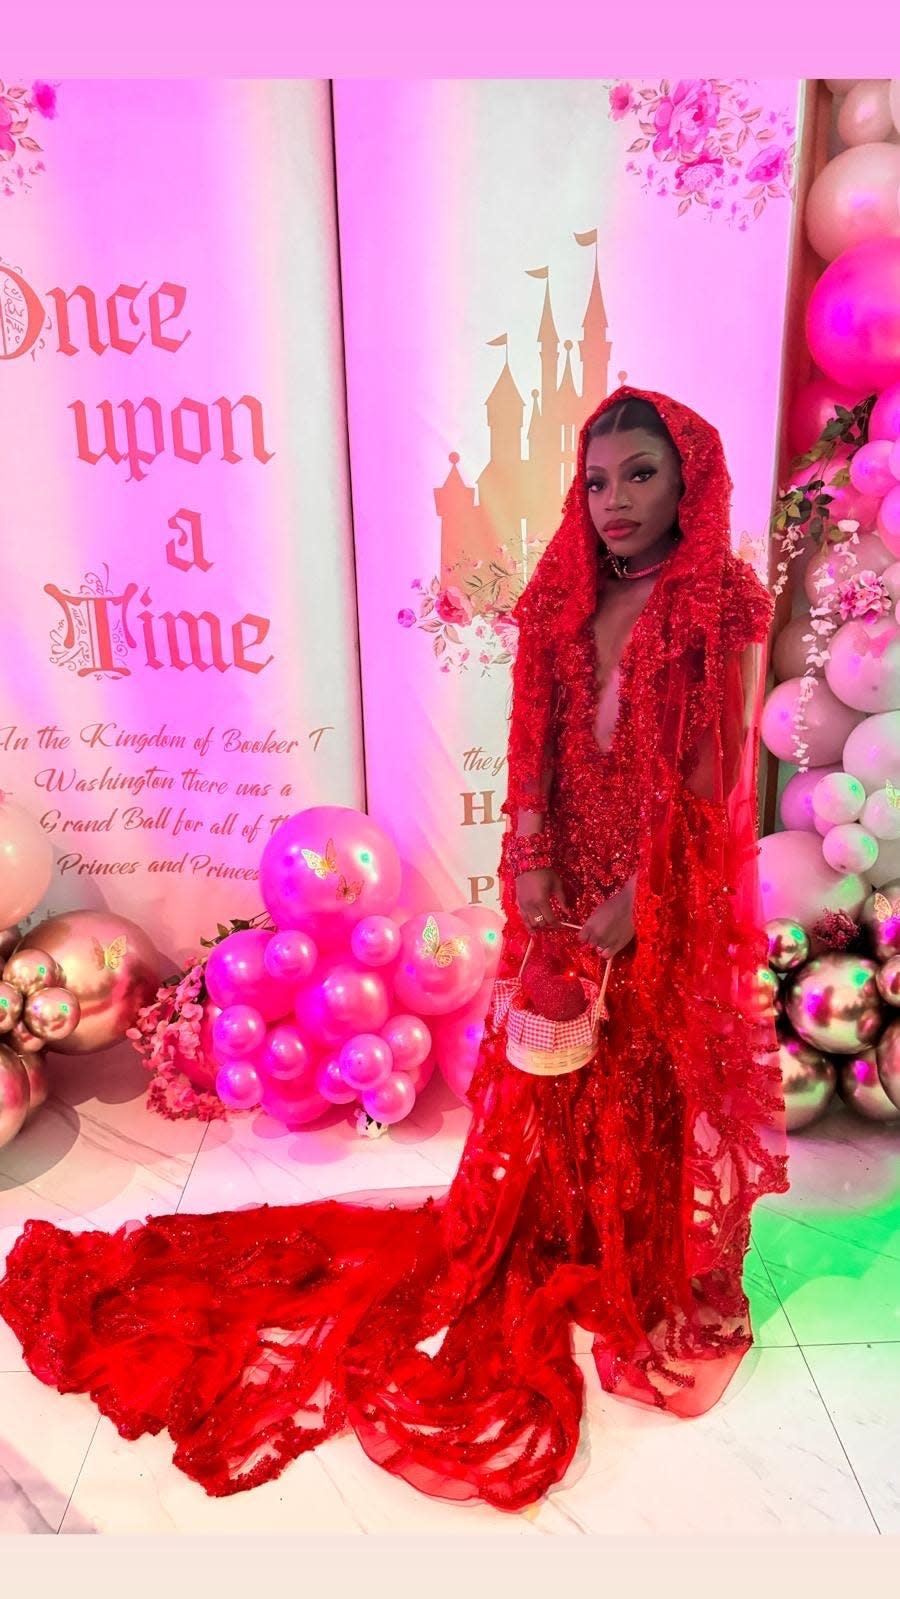 One of the favorite prom outfits that Tia Ellis liked was Little Red Riding Hood.